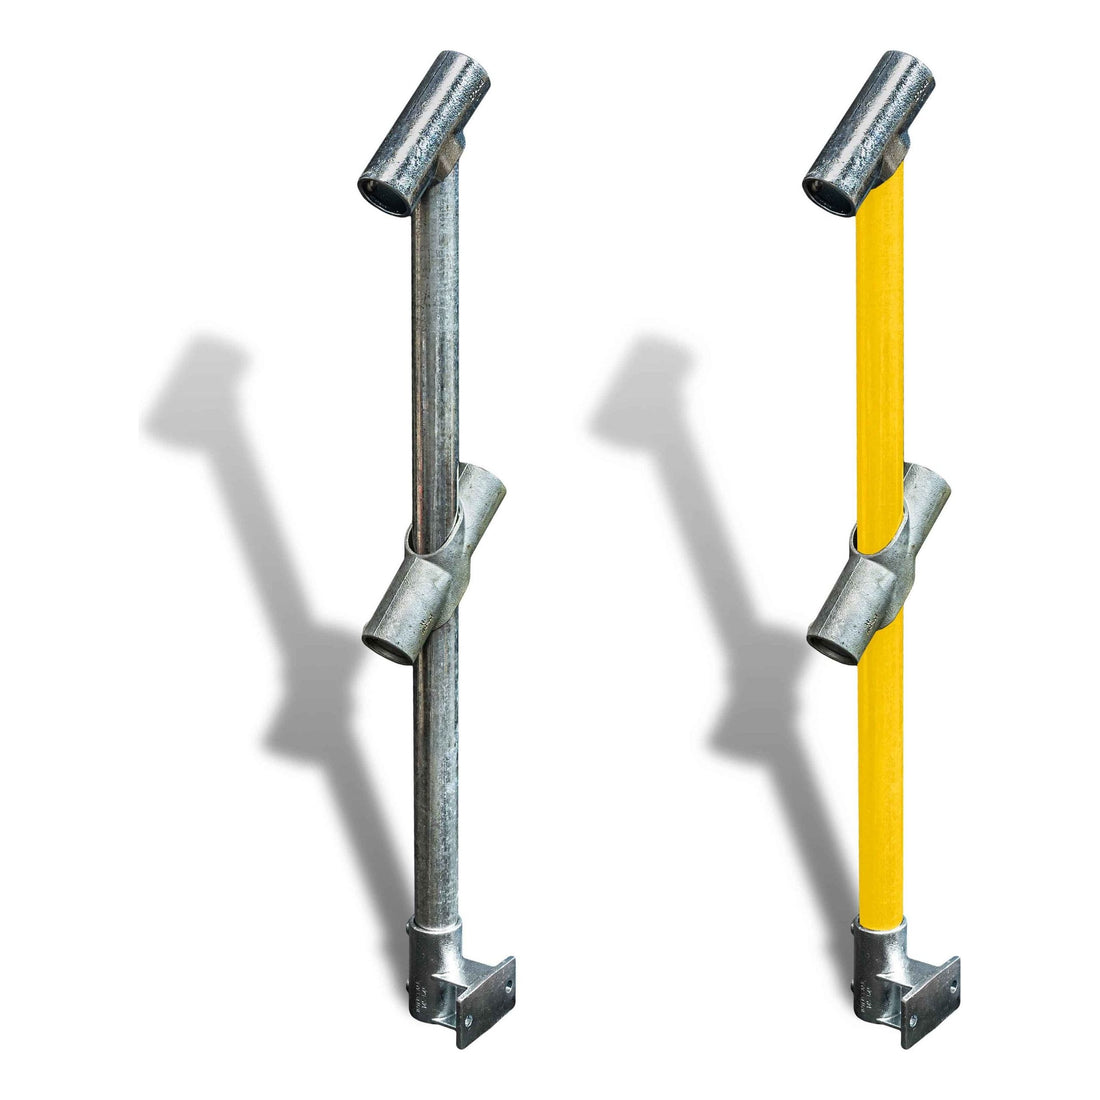 Cope Modular Rail - Angled Through Stanchion (30-45 Degree) - Wall Mount (2)